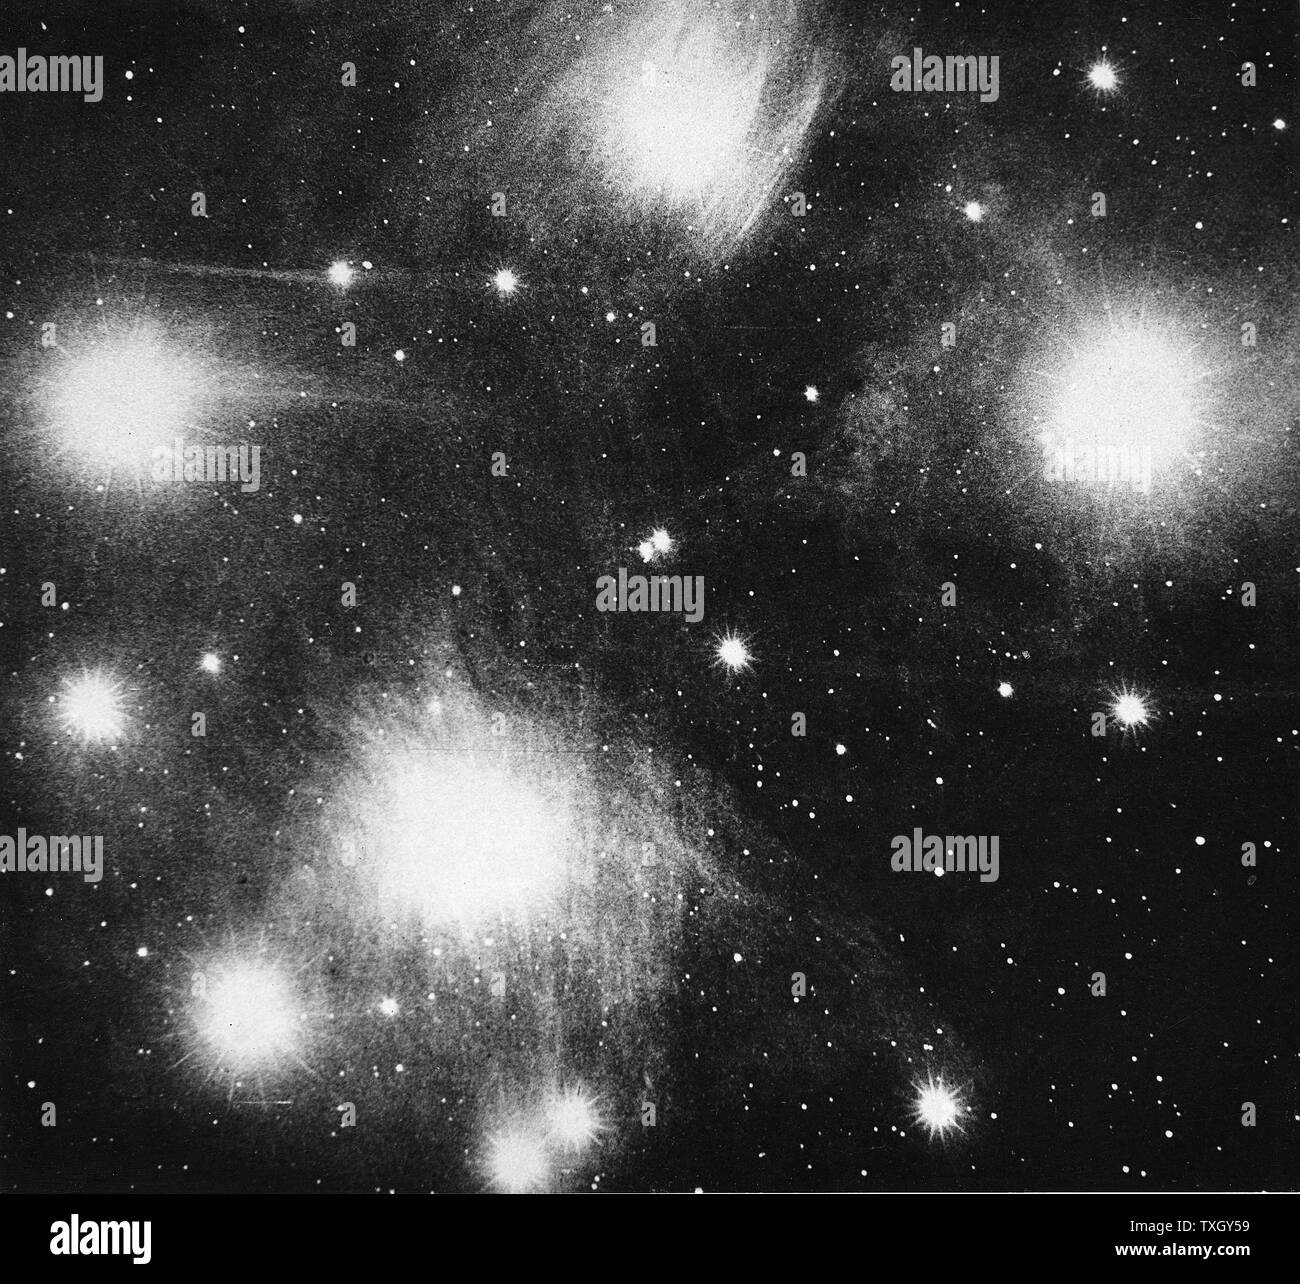 Constellation of Pleiades (Seven Sisters). photographed with the 36 inch Crossley reflector at the Lick Observatory. From 'The Publications of the Lick Observatory' Vol.VIII 1908  Sacramento Stock Photo